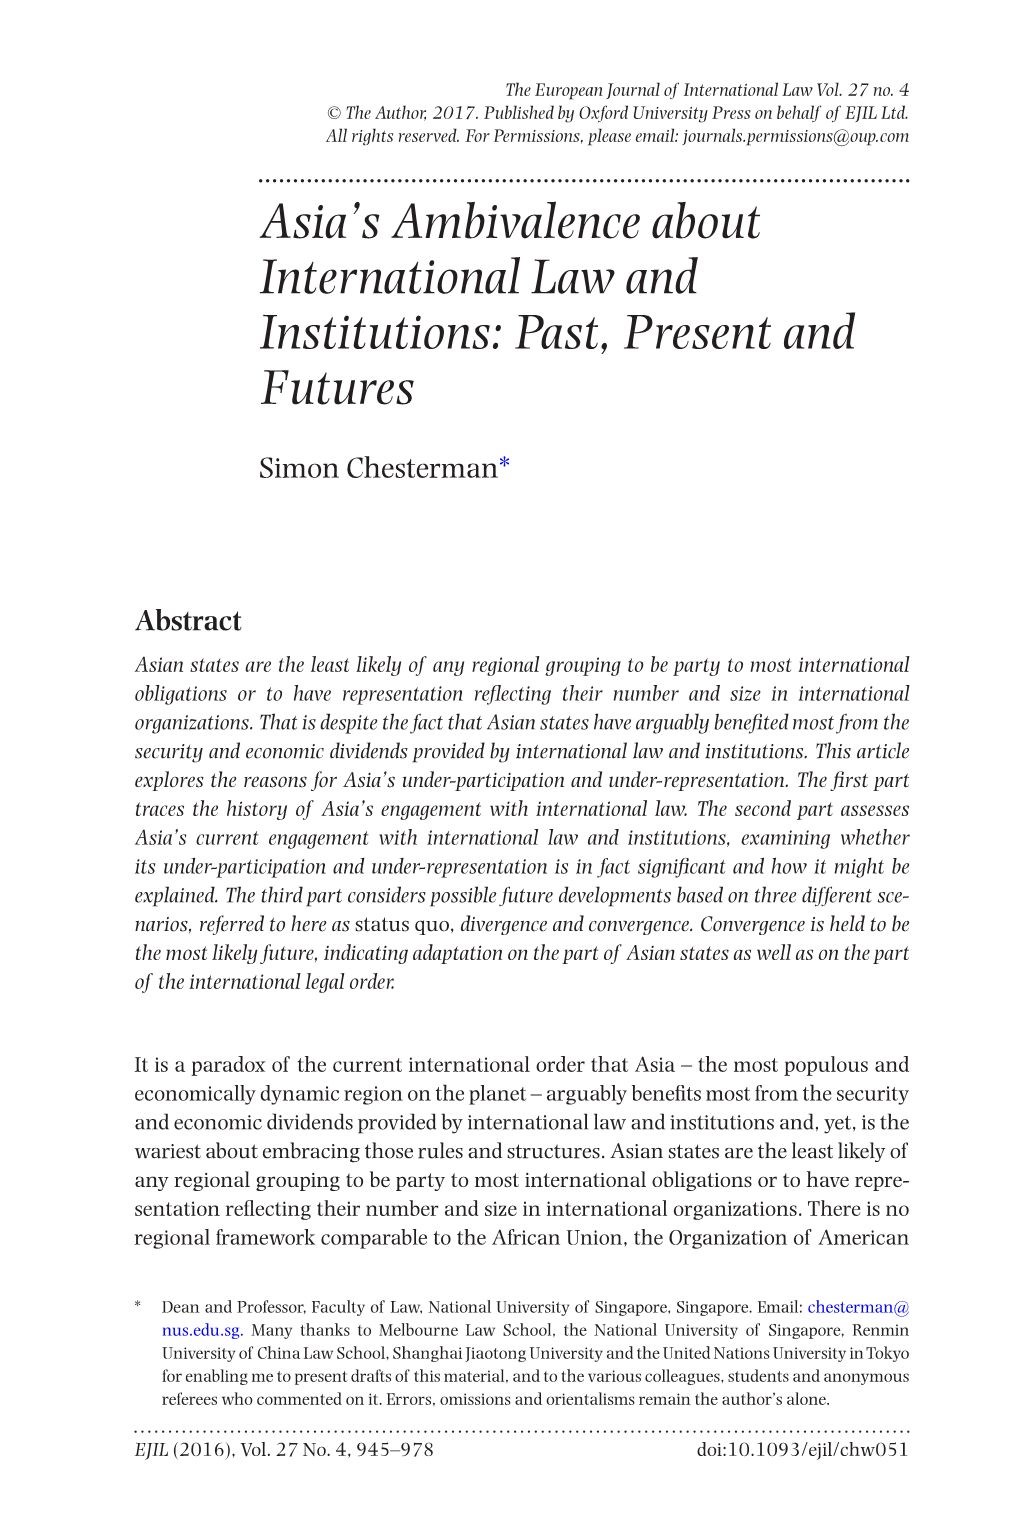 Asia's Ambivalence About International Law and Institutions